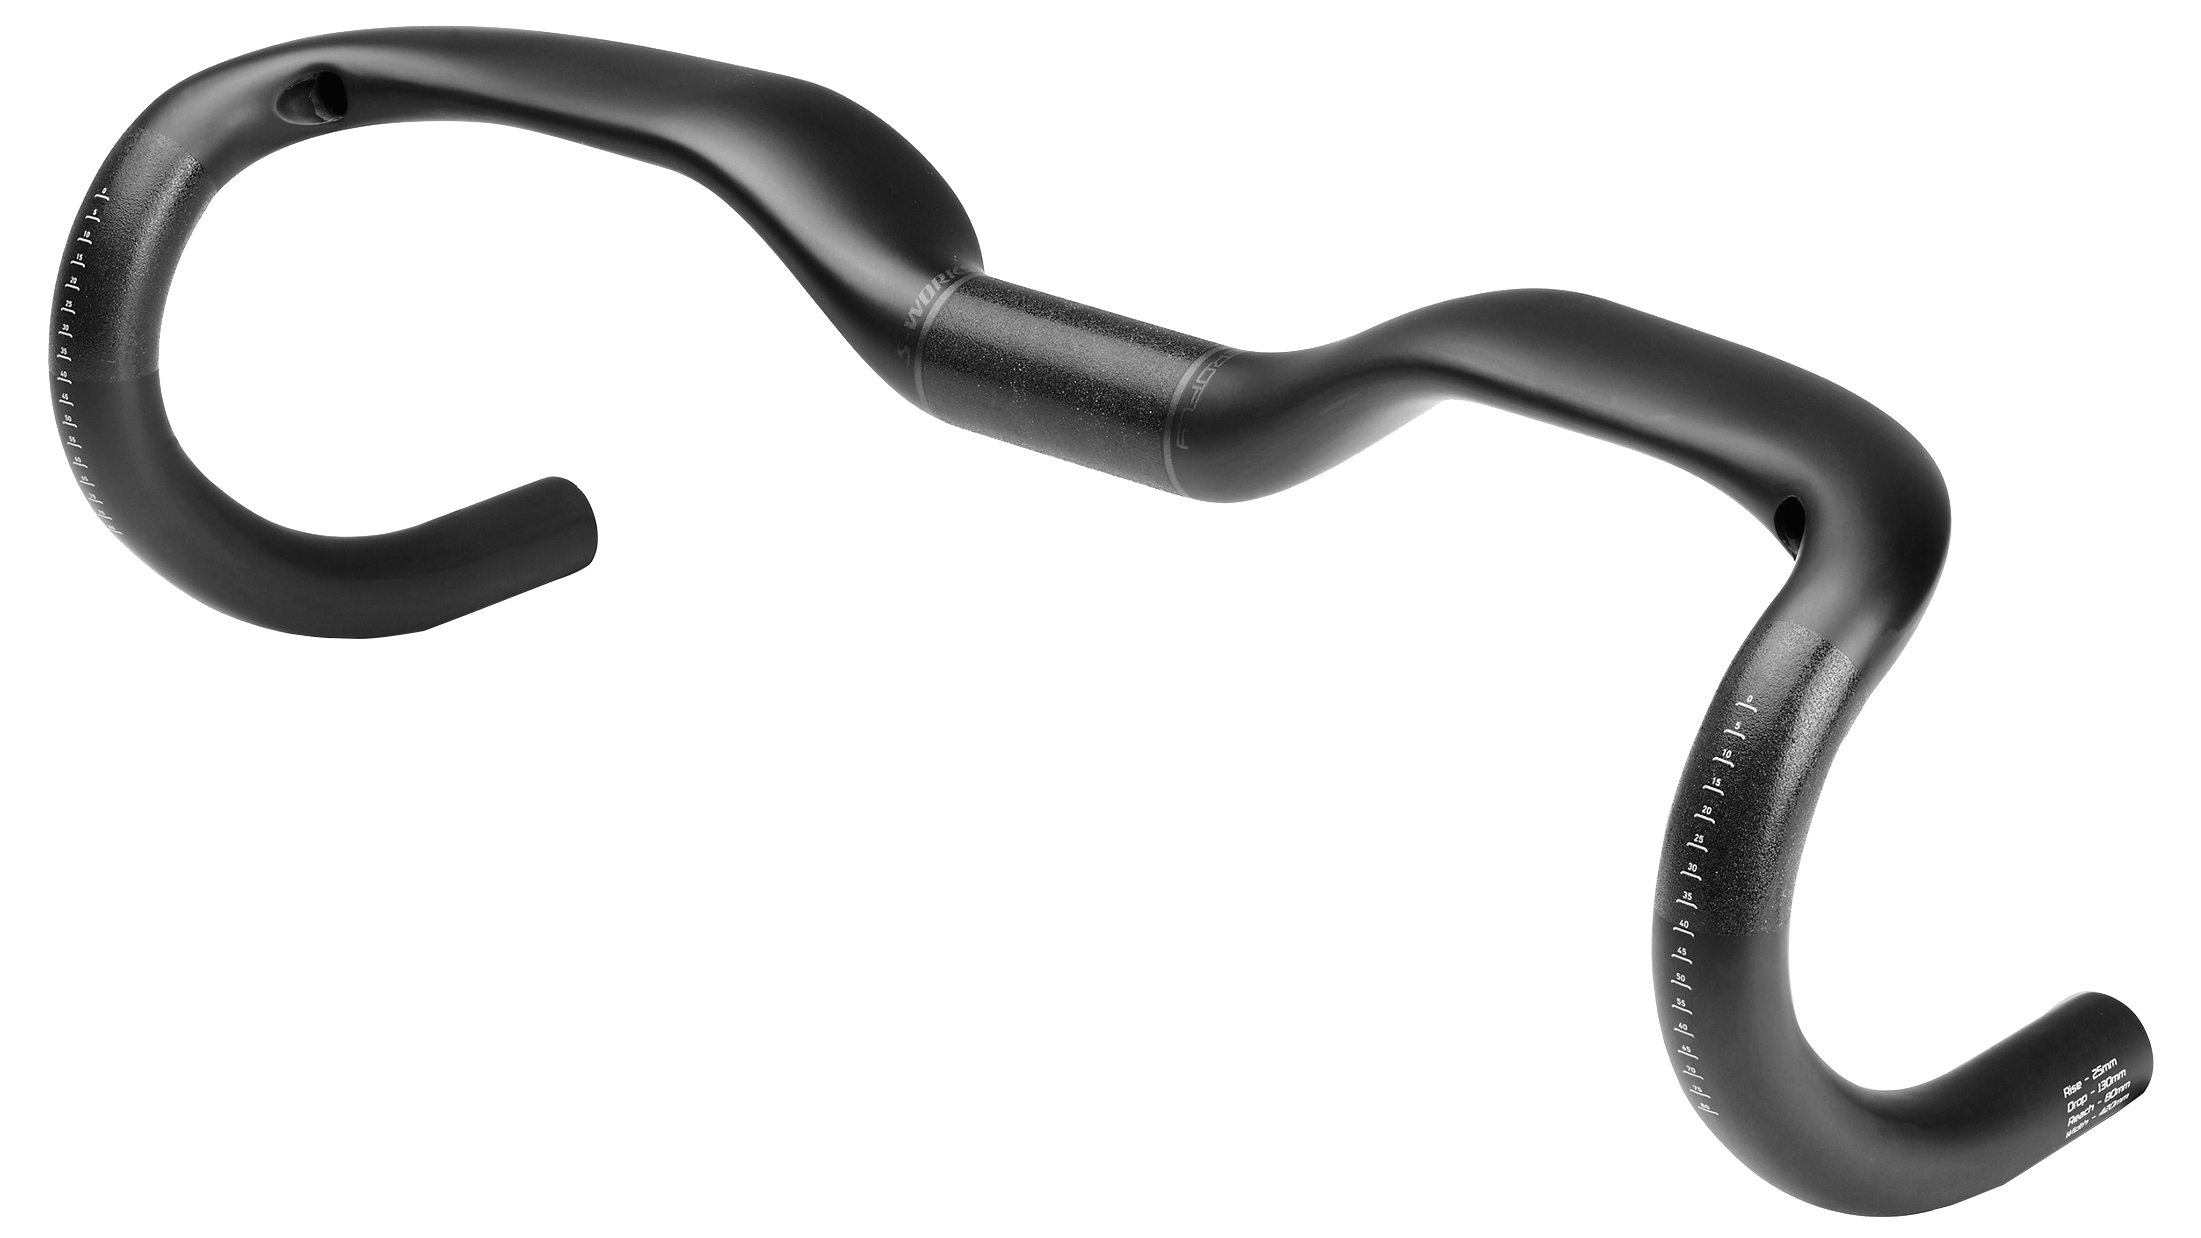 Specialized | S-Works Aerofly Handlebar 42cm, +25mm Rise